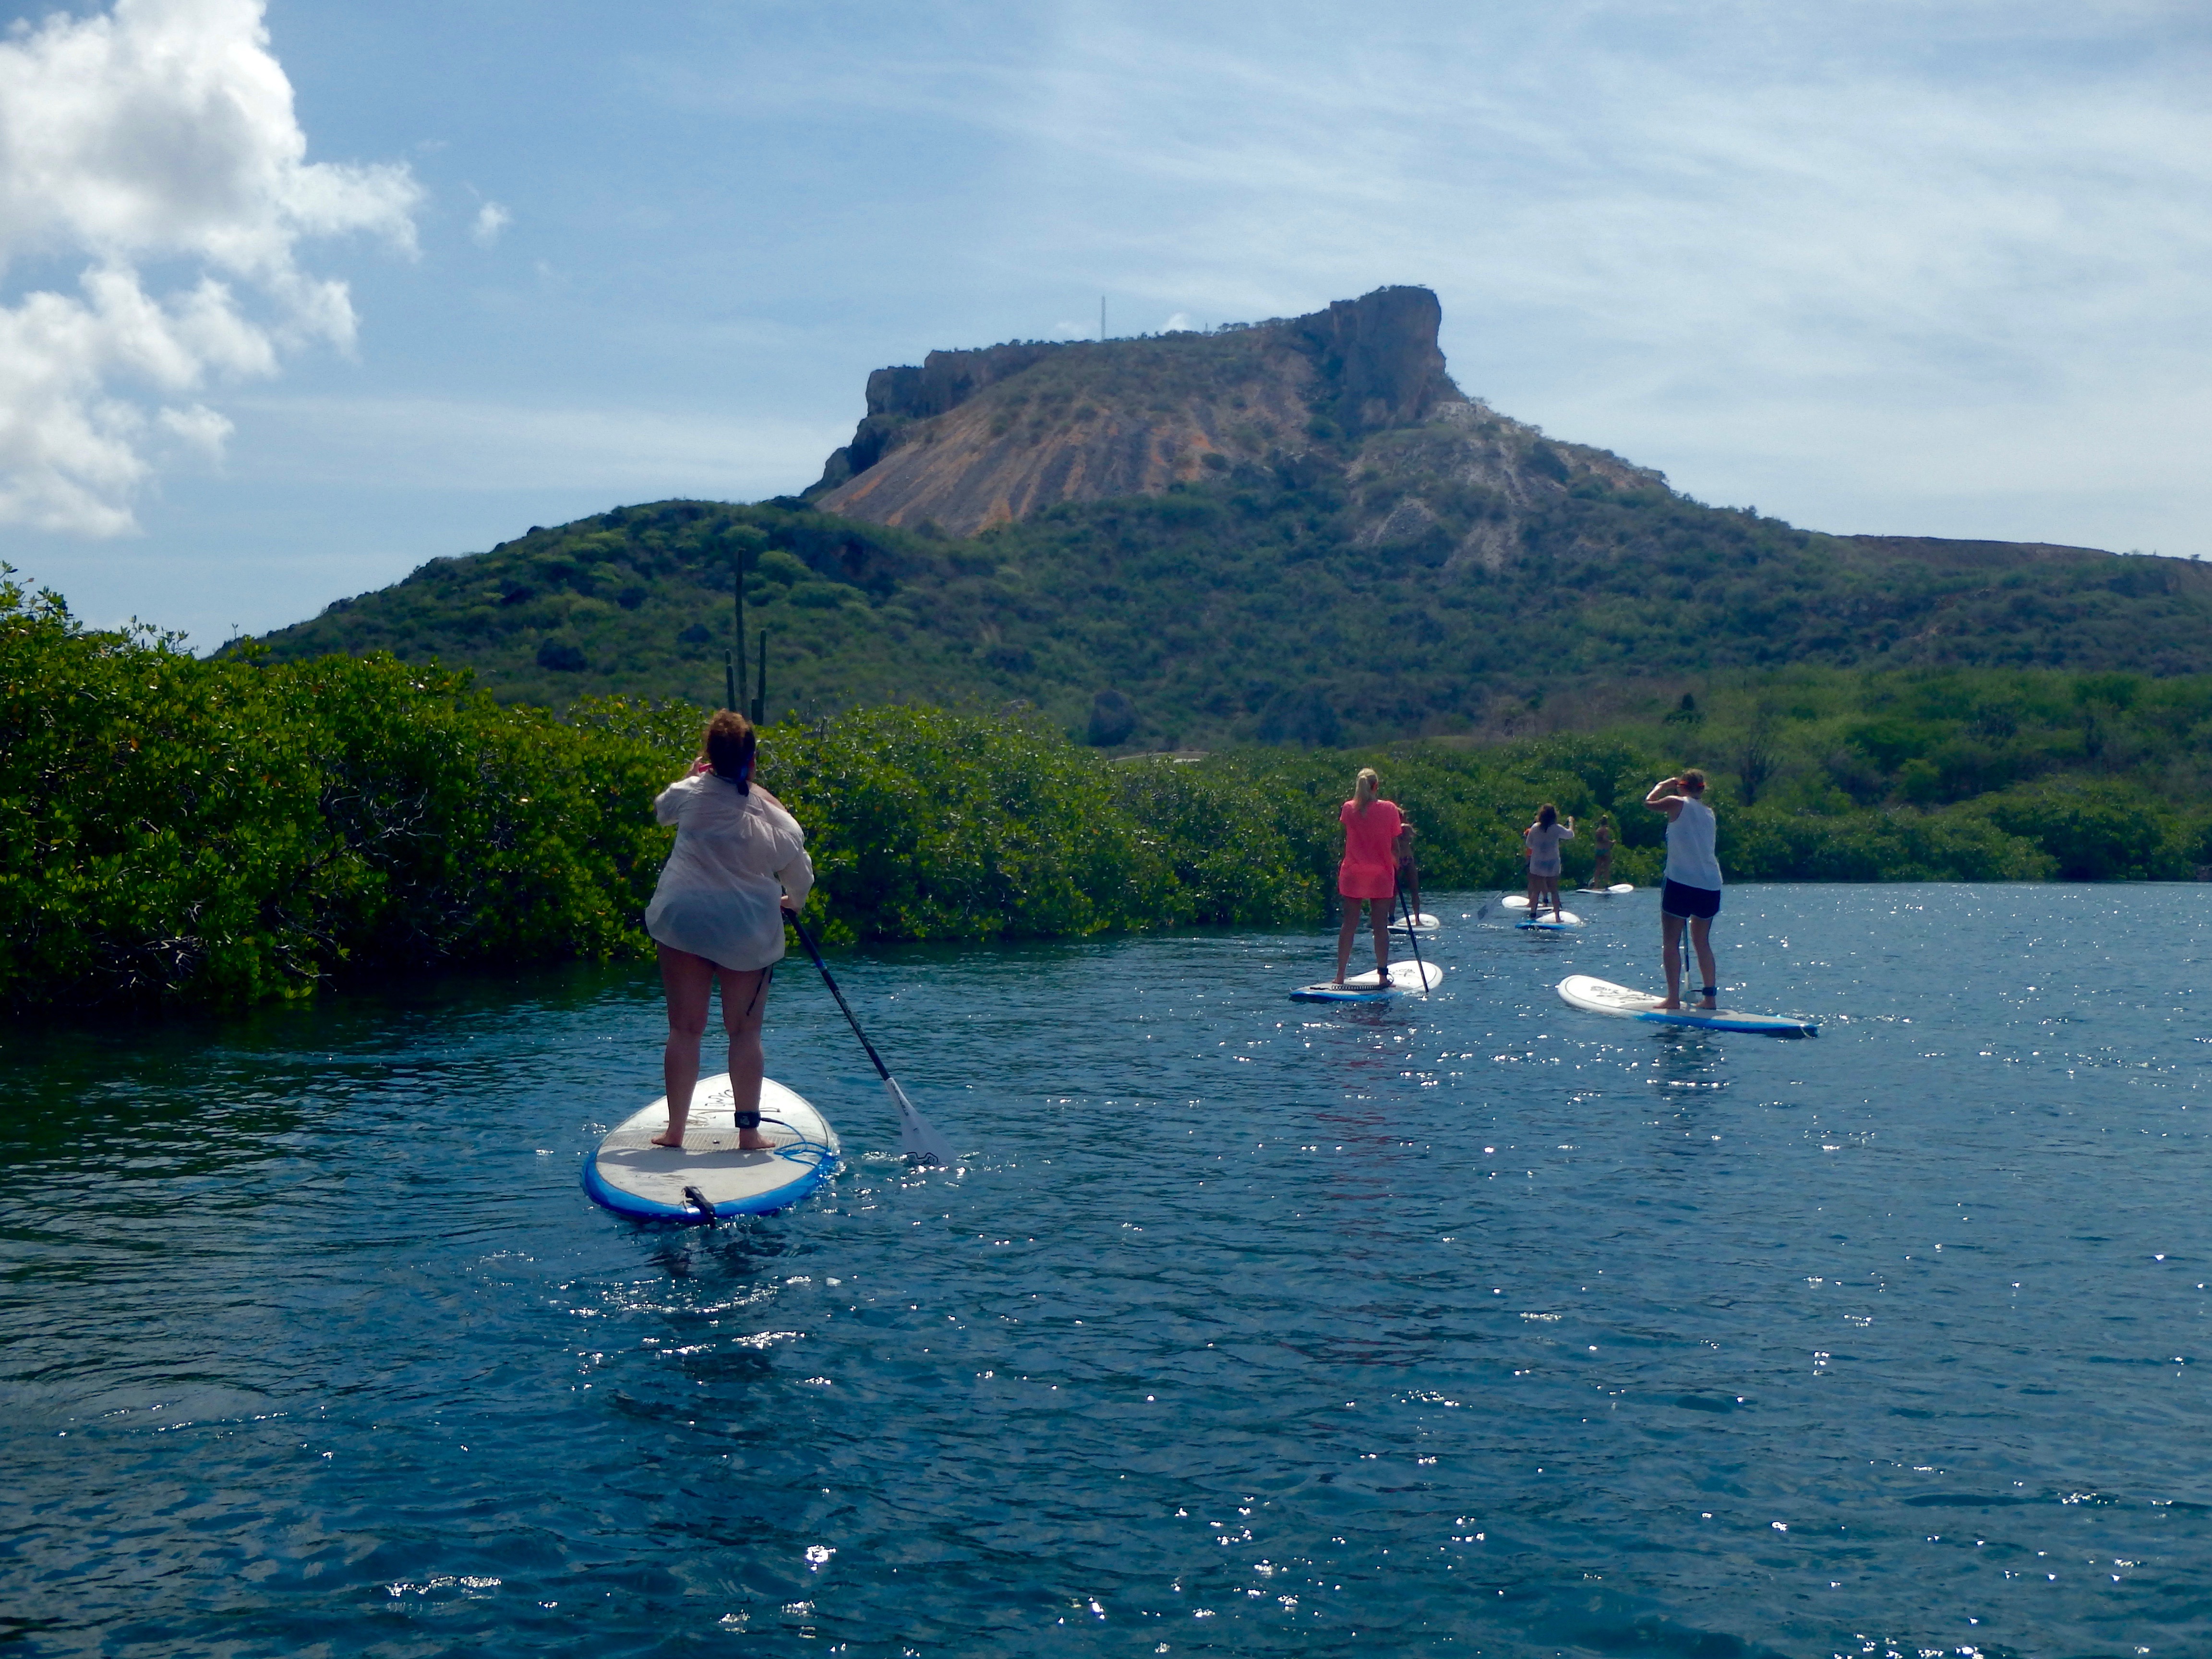 Looking for Unique Things to Do in Curacao? Try A SUP Curacao Excursion! - See Her Travel4608 x 3456